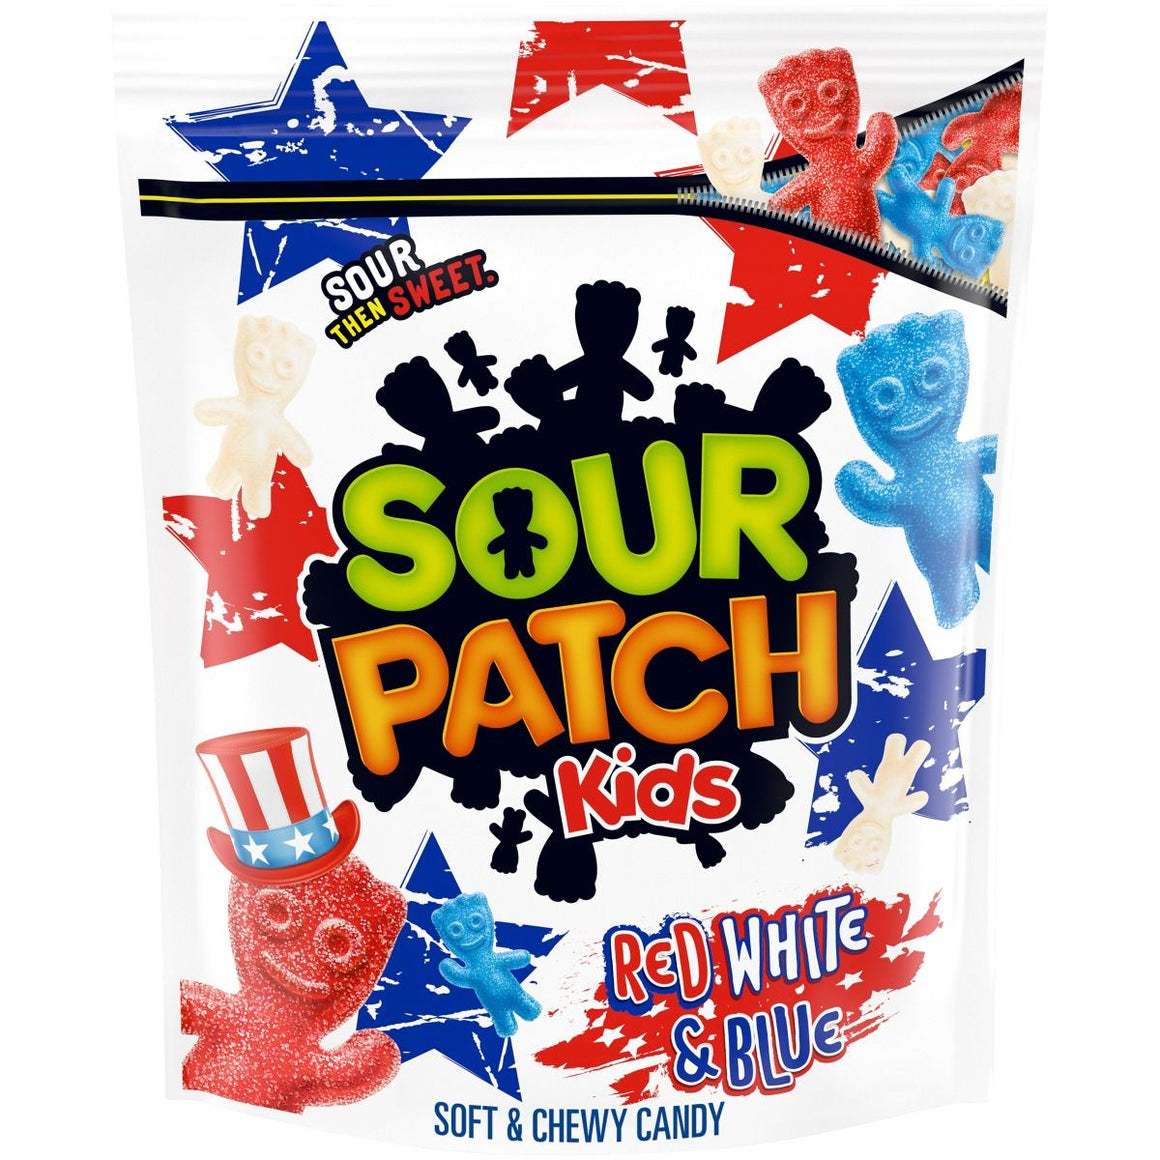 All City Candy Sour Patch Kids Red, White, & Blue - 1.8 lb. Bag Sour Mondelez International For fresh candy and great service, visit www.allcitycandy.com